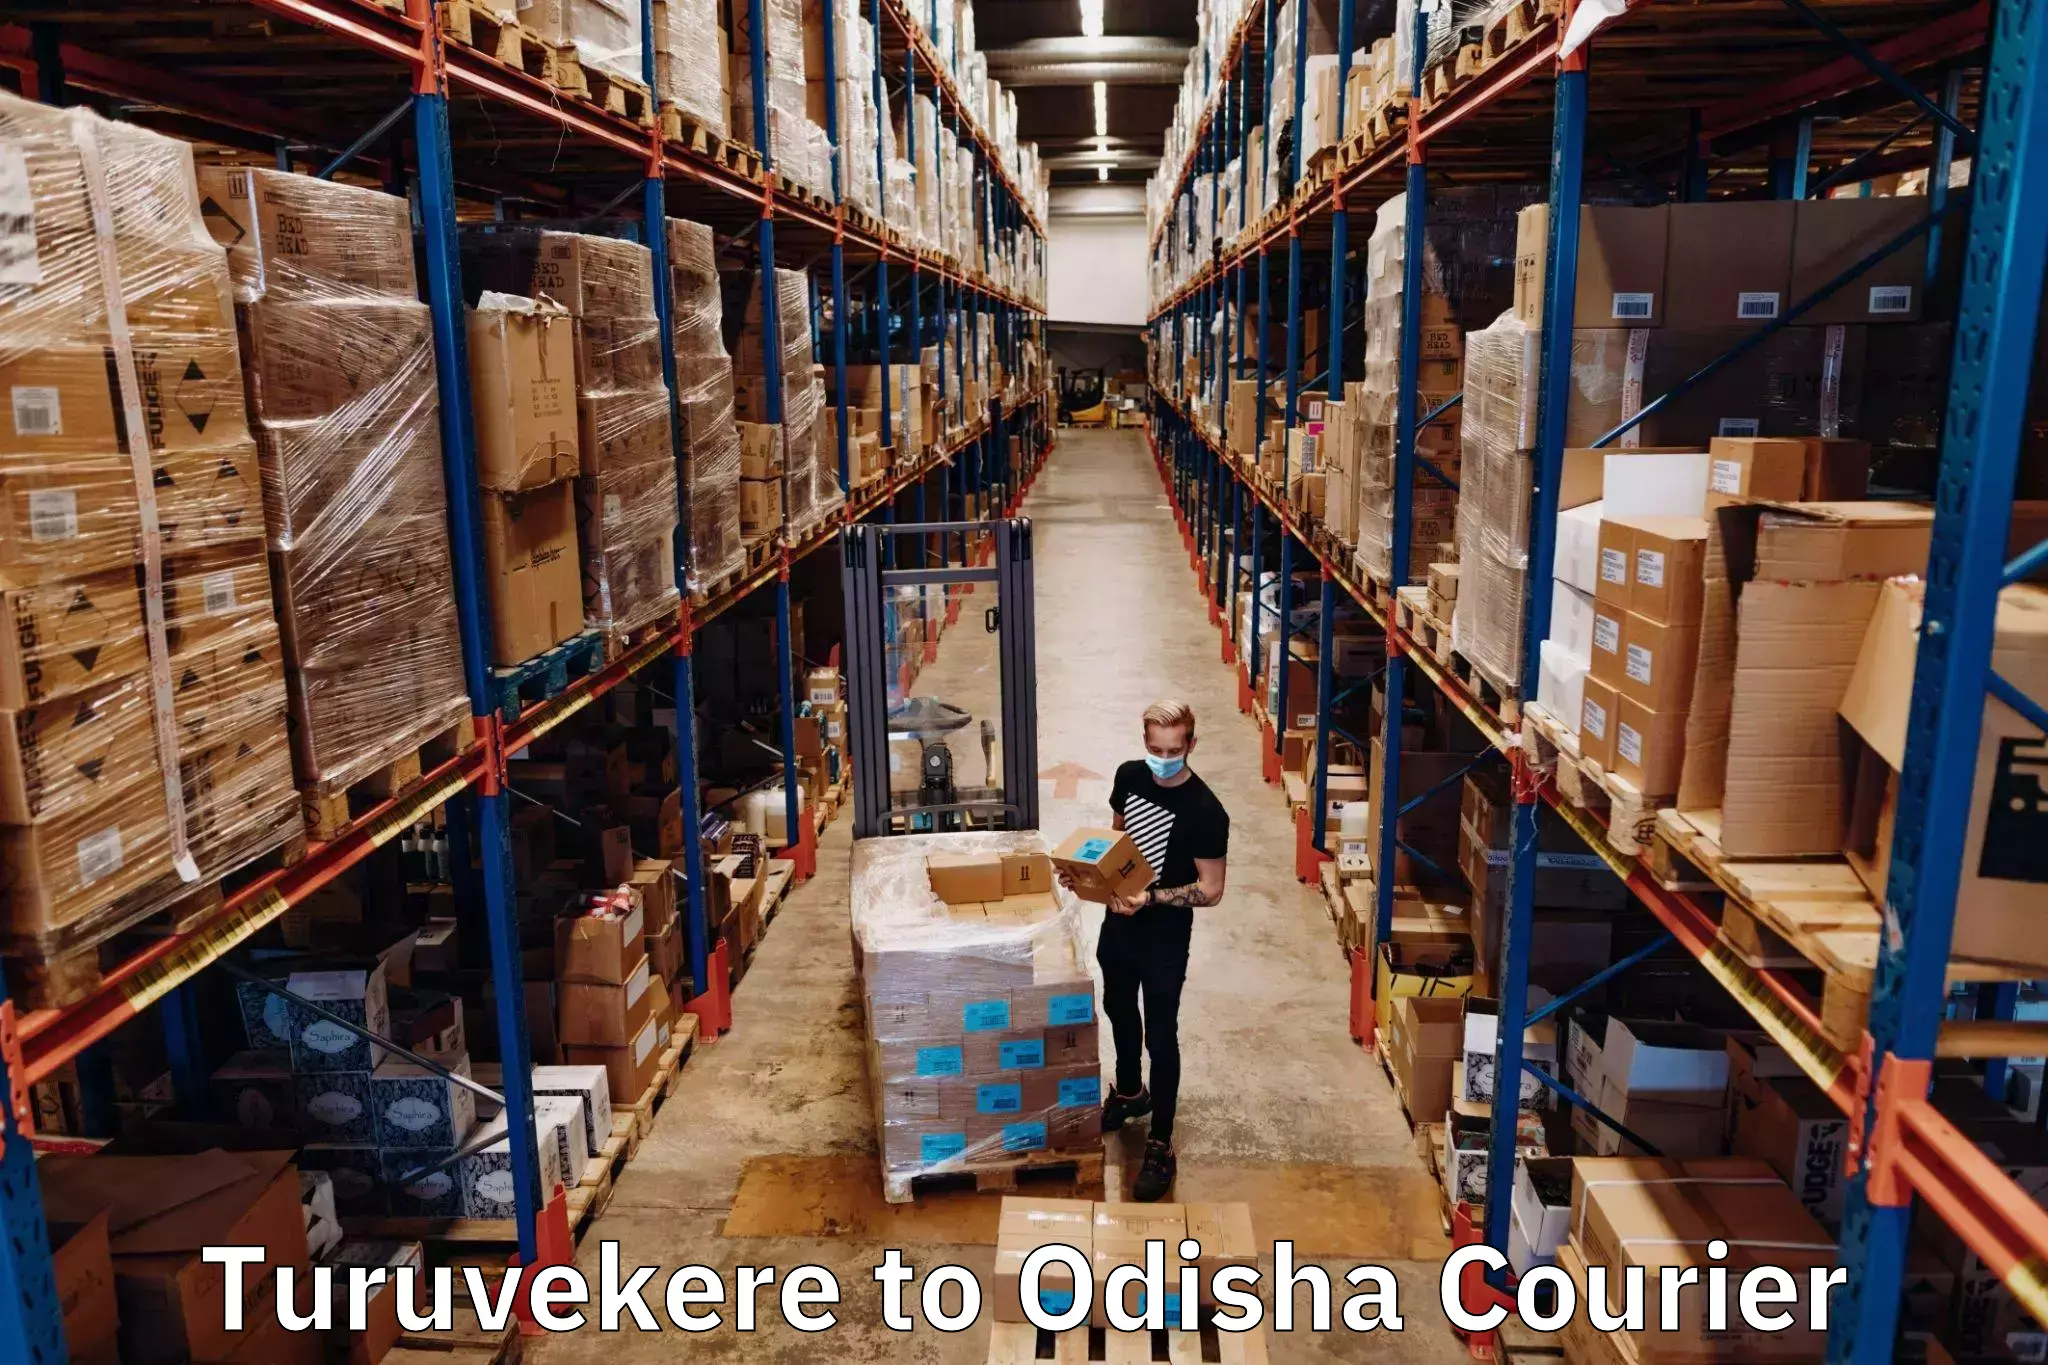 International courier networks Turuvekere to Riamal